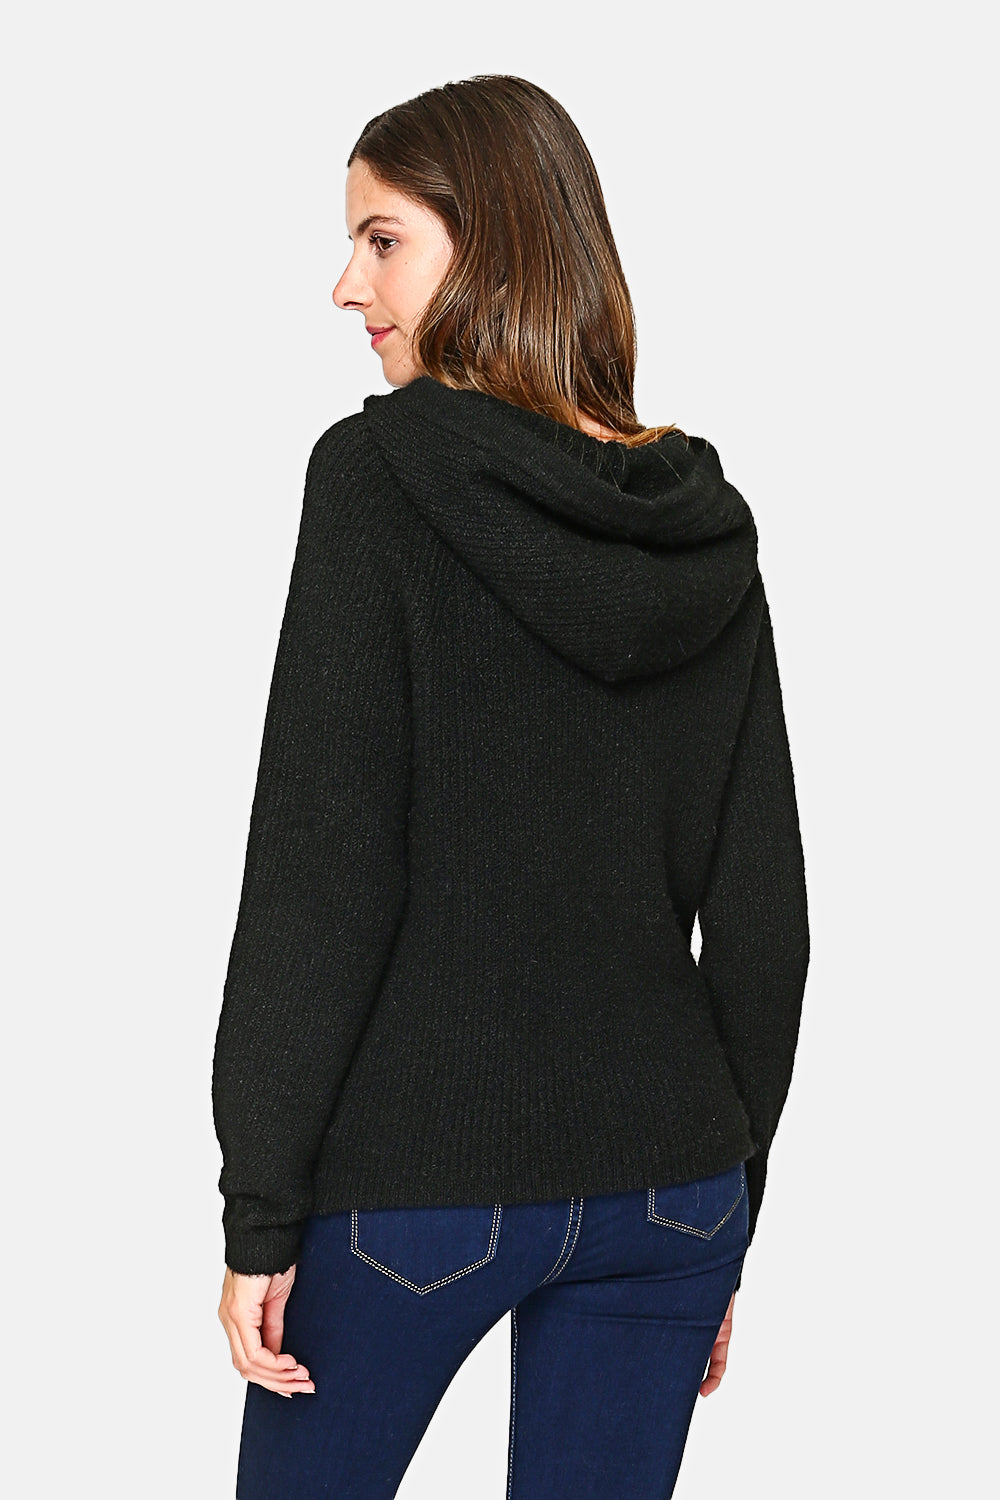 Hoodie with cable armholes and cuffs